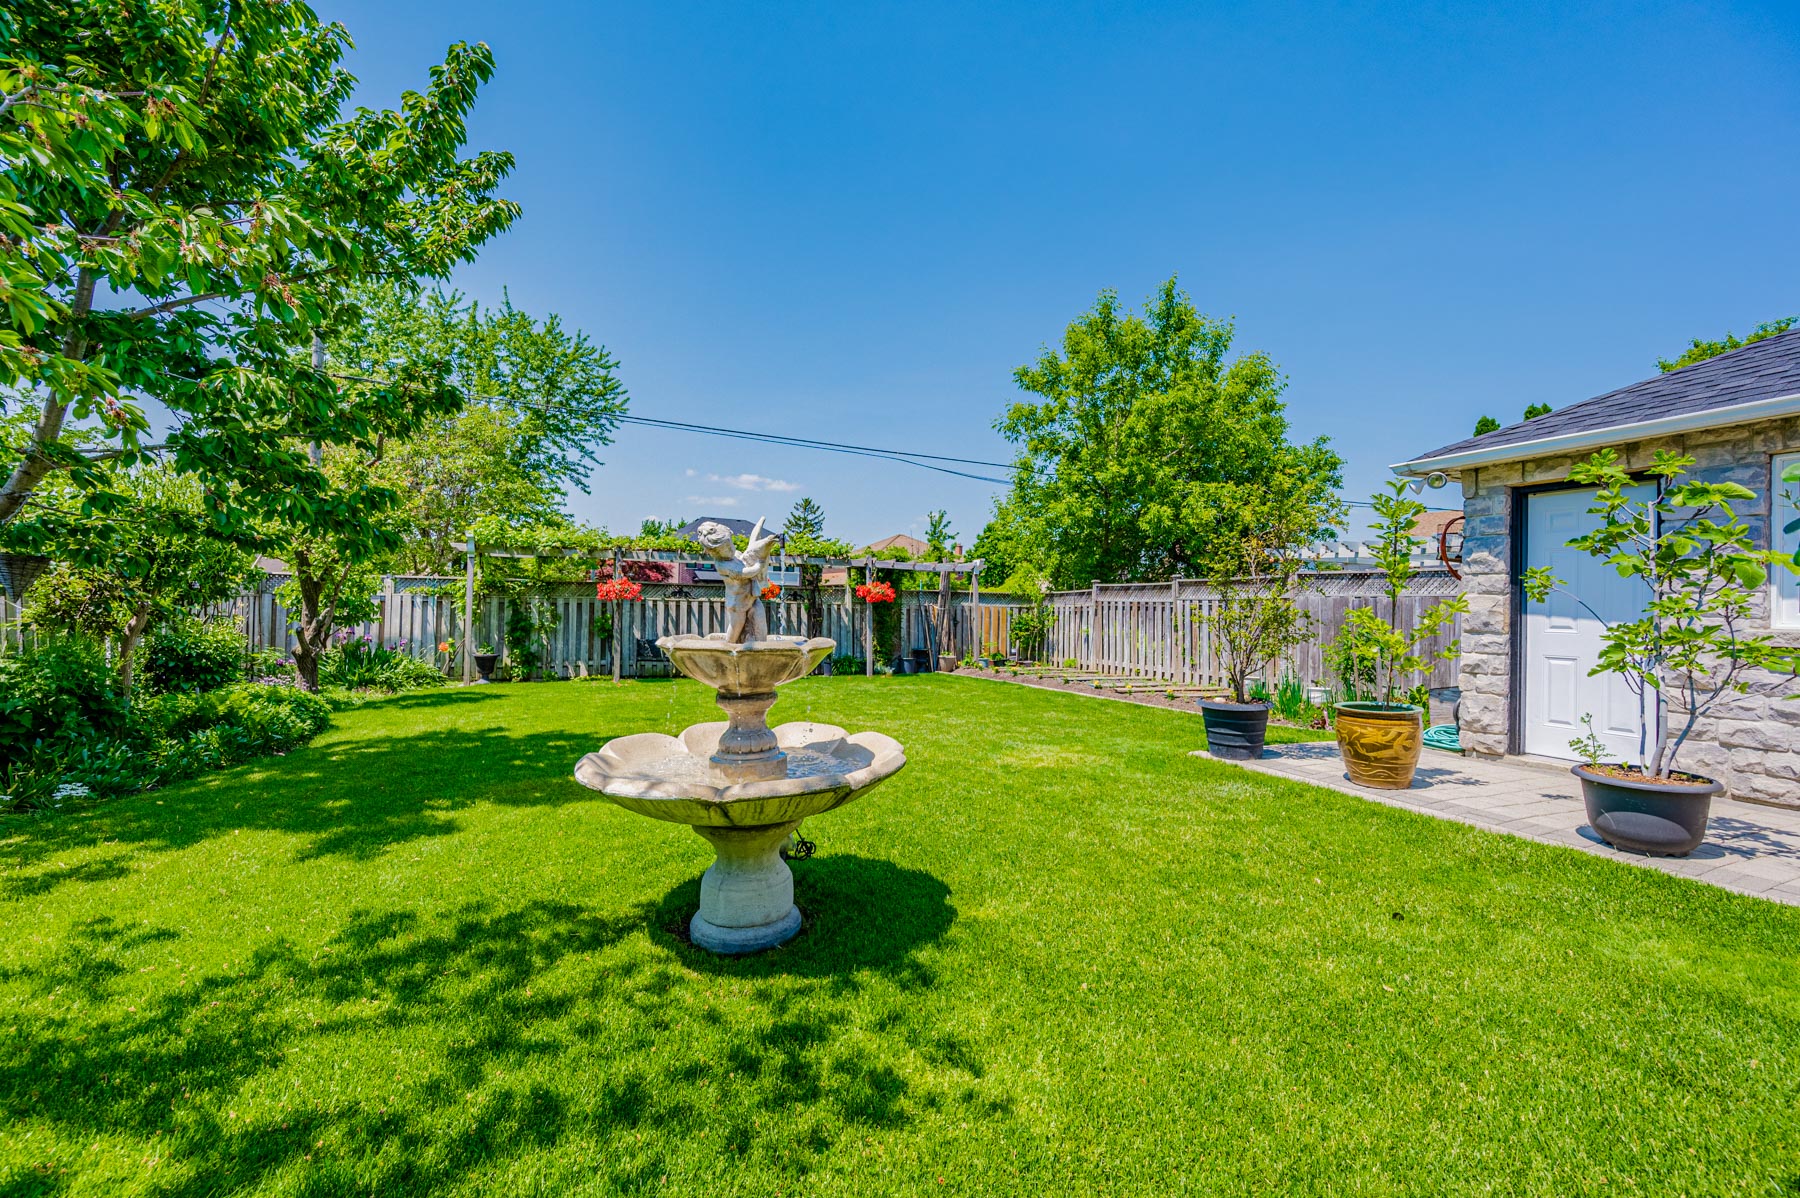 Backyard with fountain, trees, shrubs, garden plots and high fence.